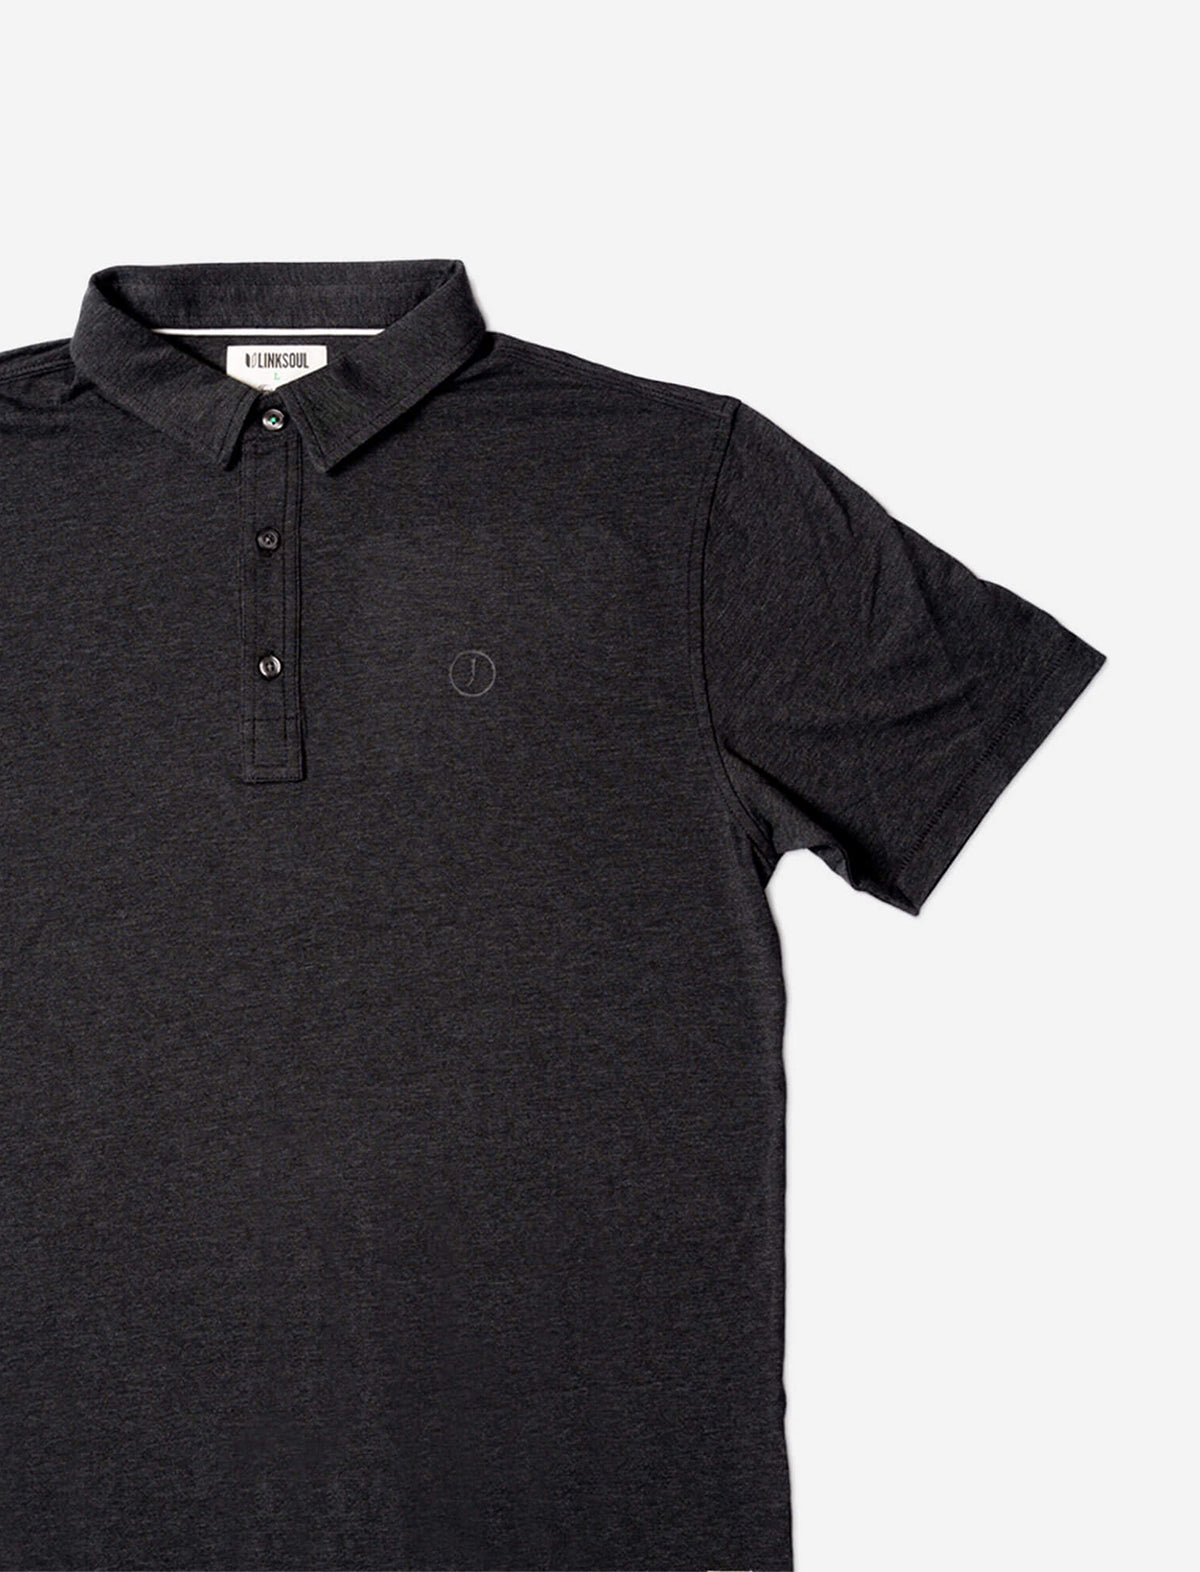 THE GOLFERS JOURNAL Circle Tee Drytech Polo Shirt in Black